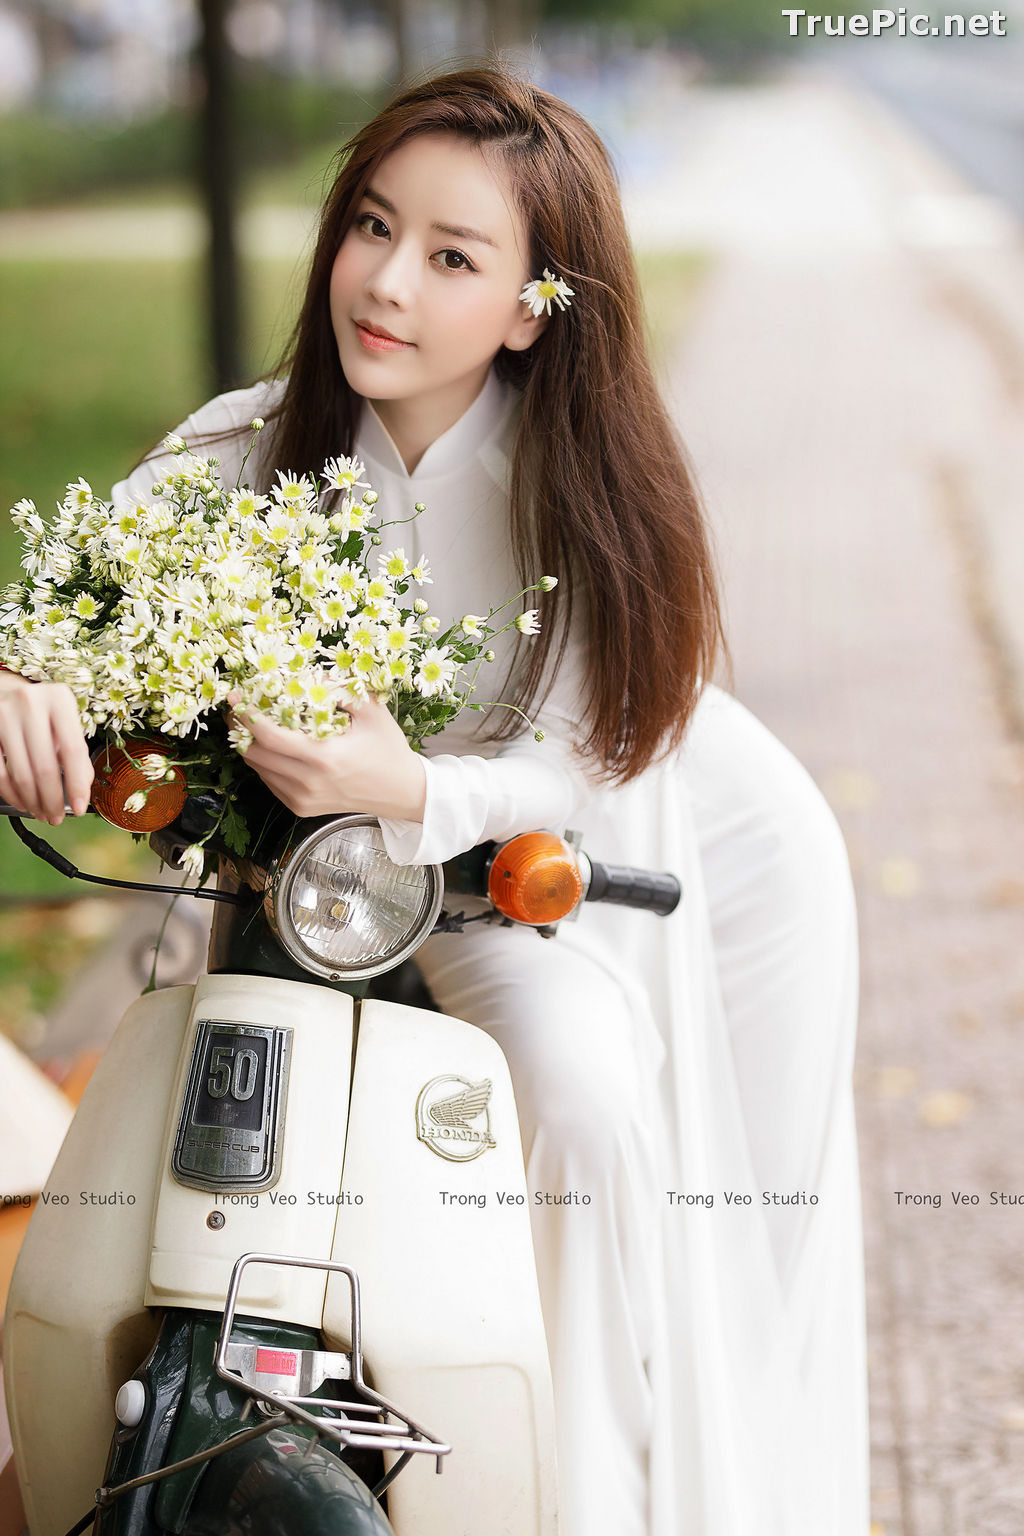 Image The Beauty of Vietnamese Girls with Traditional Dress (Ao Dai) #5 - TruePic.net - Picture-28